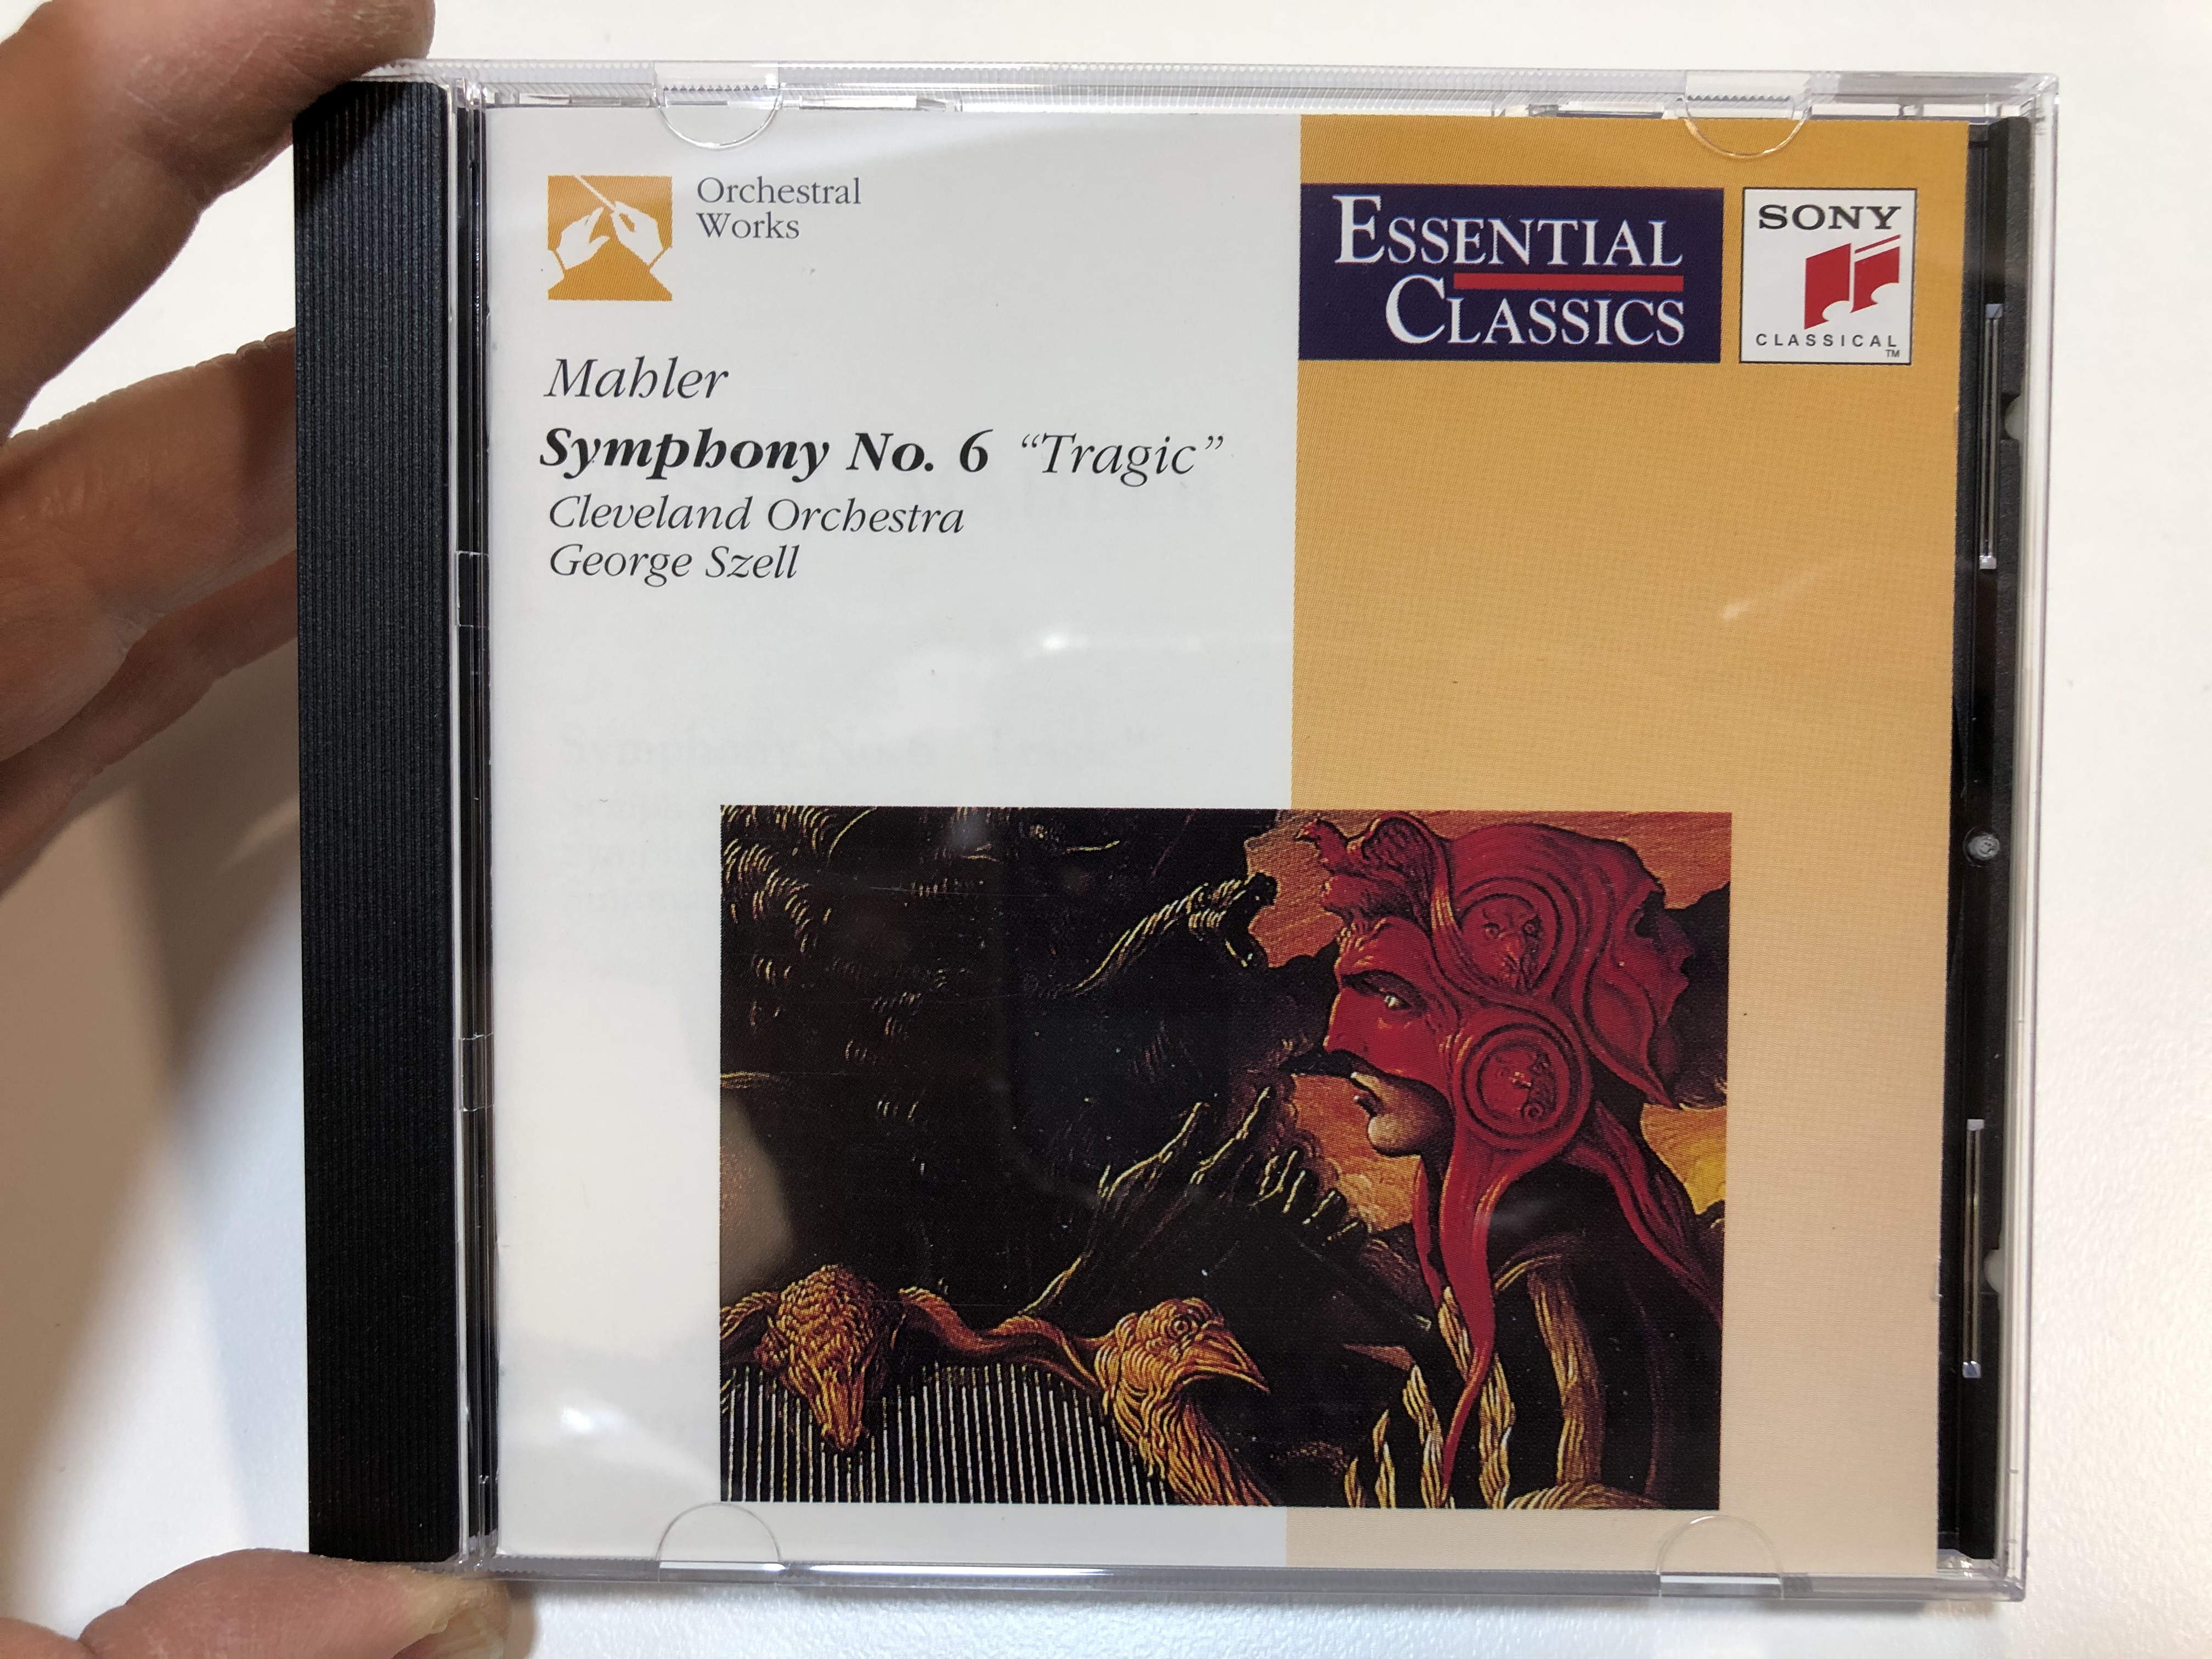 mahler-symphony-no.-6-tragic-cleveland-orchestra-george-szell-essential-classics-orchestral-works-sony-classical-audio-cd-1991-sbk-47654-1-.jpg